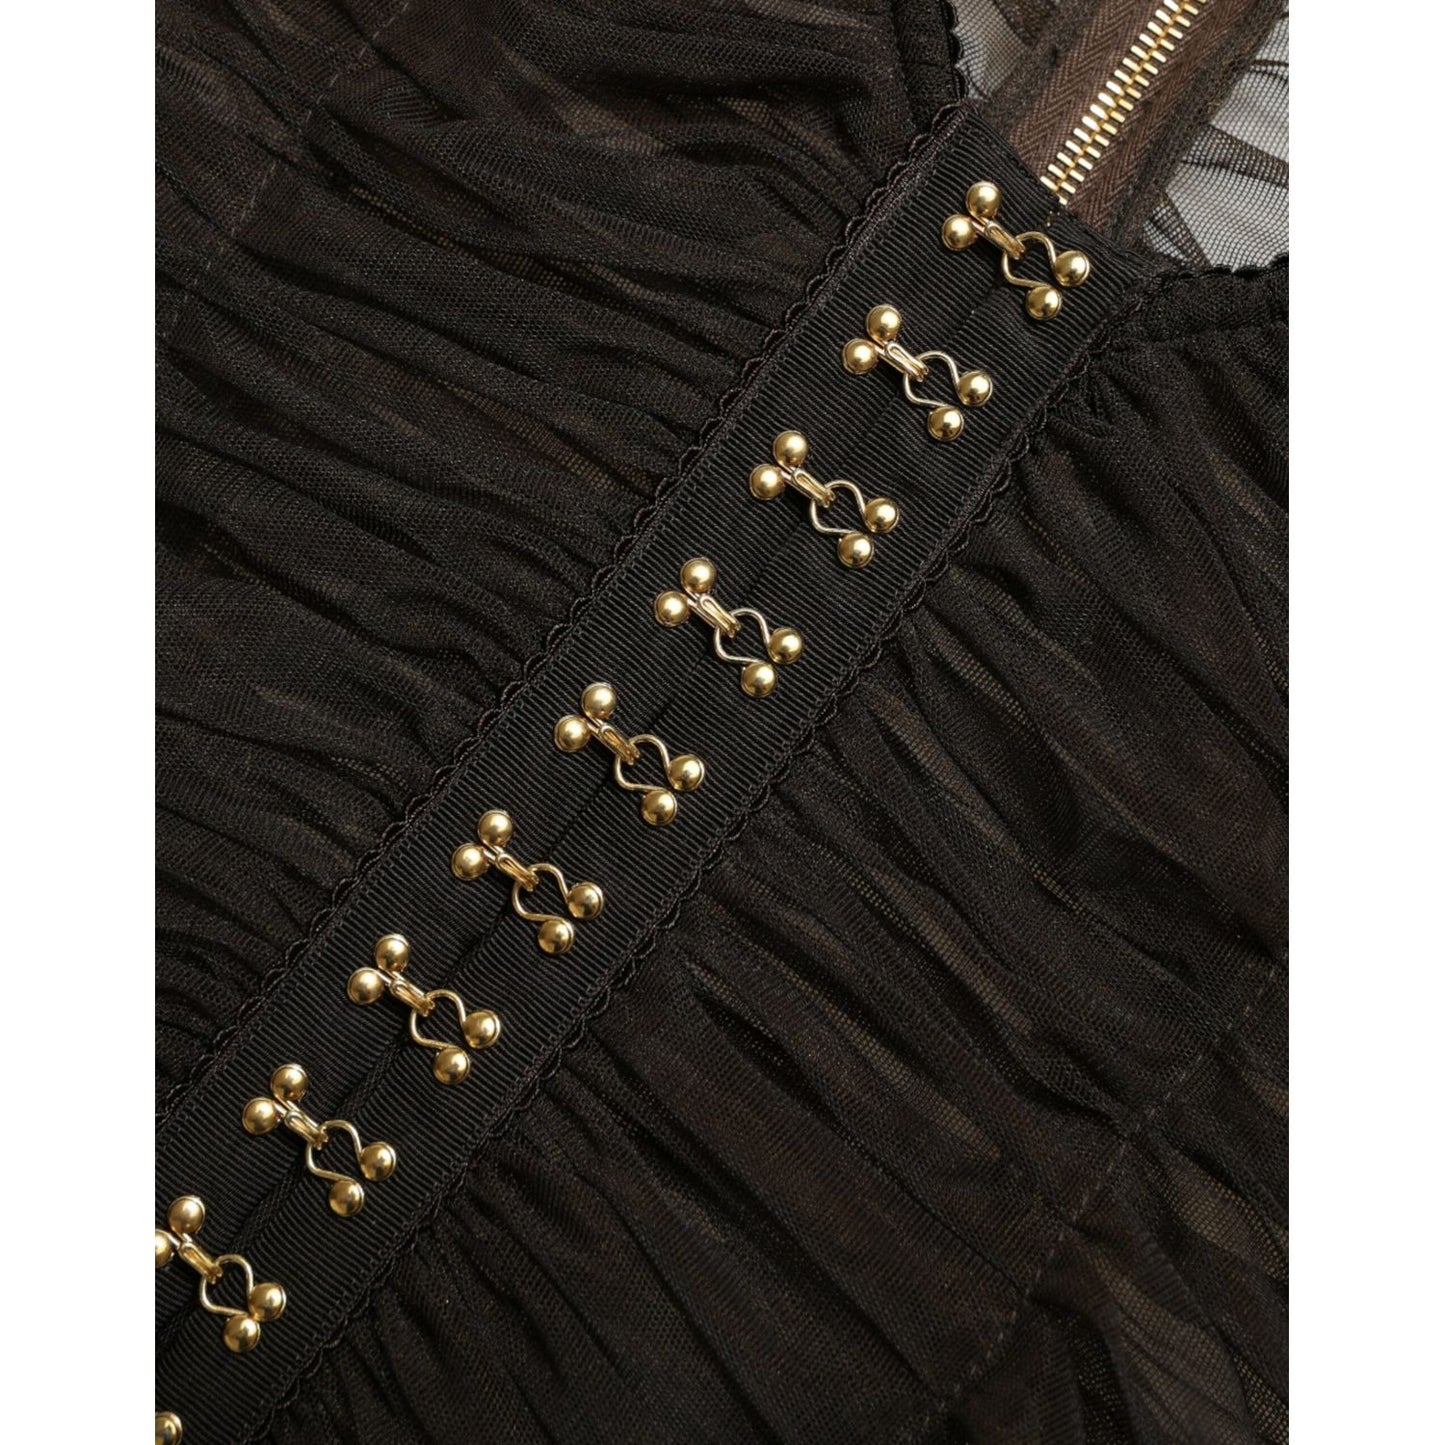 Dolce & Gabbana Embellished Cropped Sleeveless Top brown-embellished-nylon-stretch-cropped-top